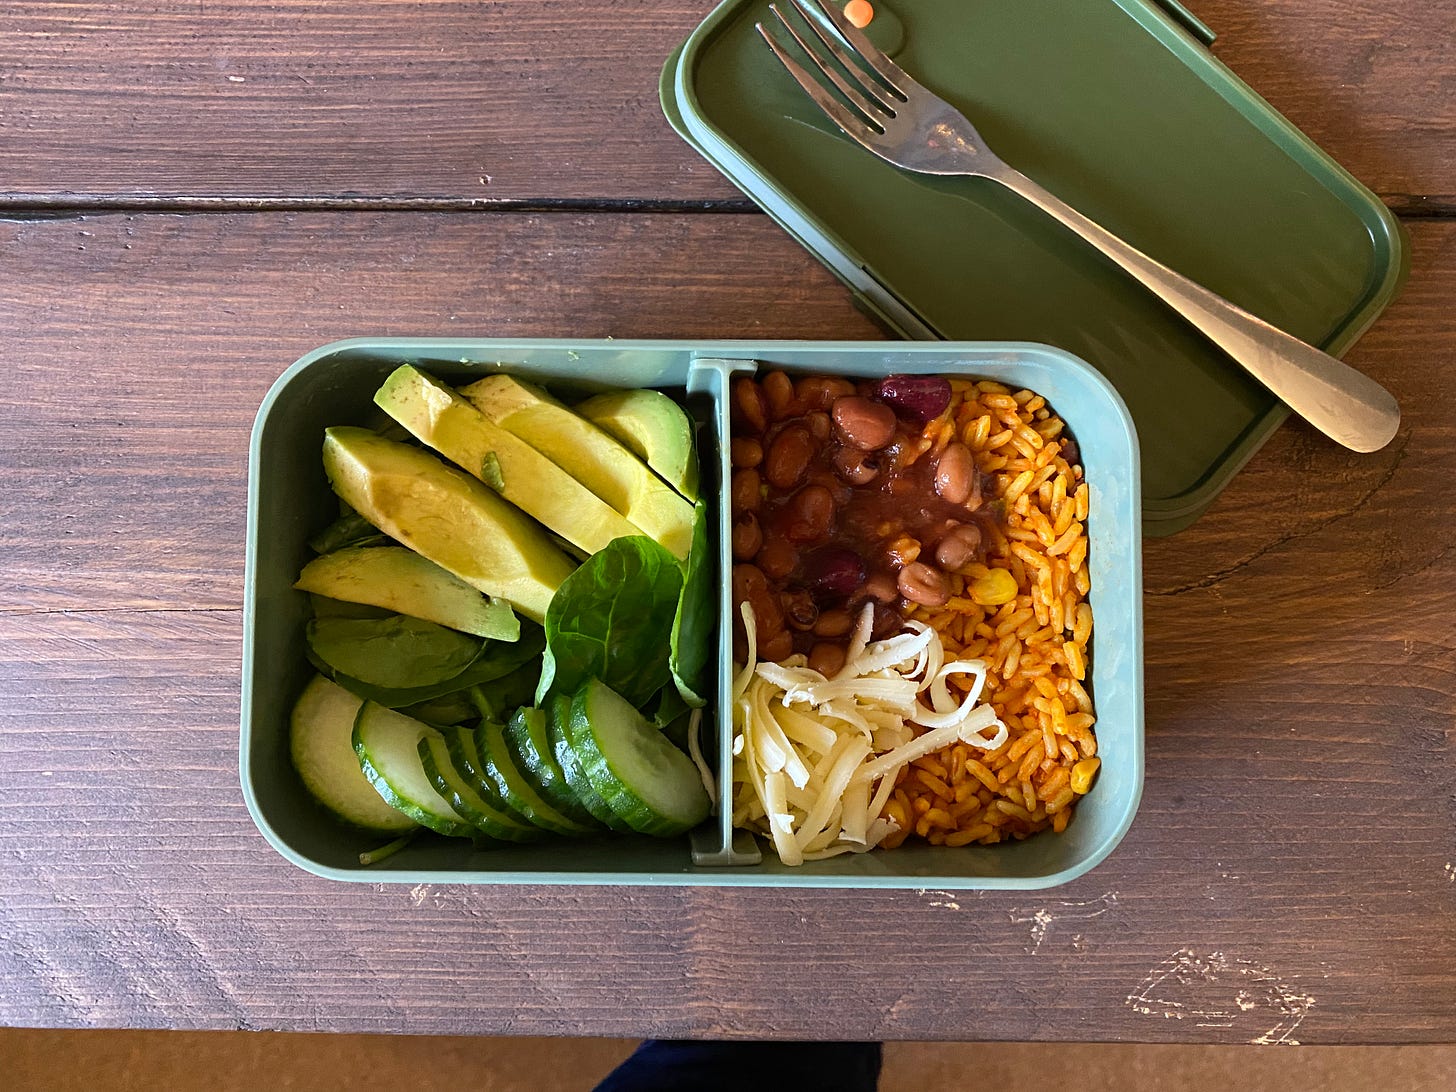 Bento box with lid off, filled with avocado, cucumber, rice, beans and cheese